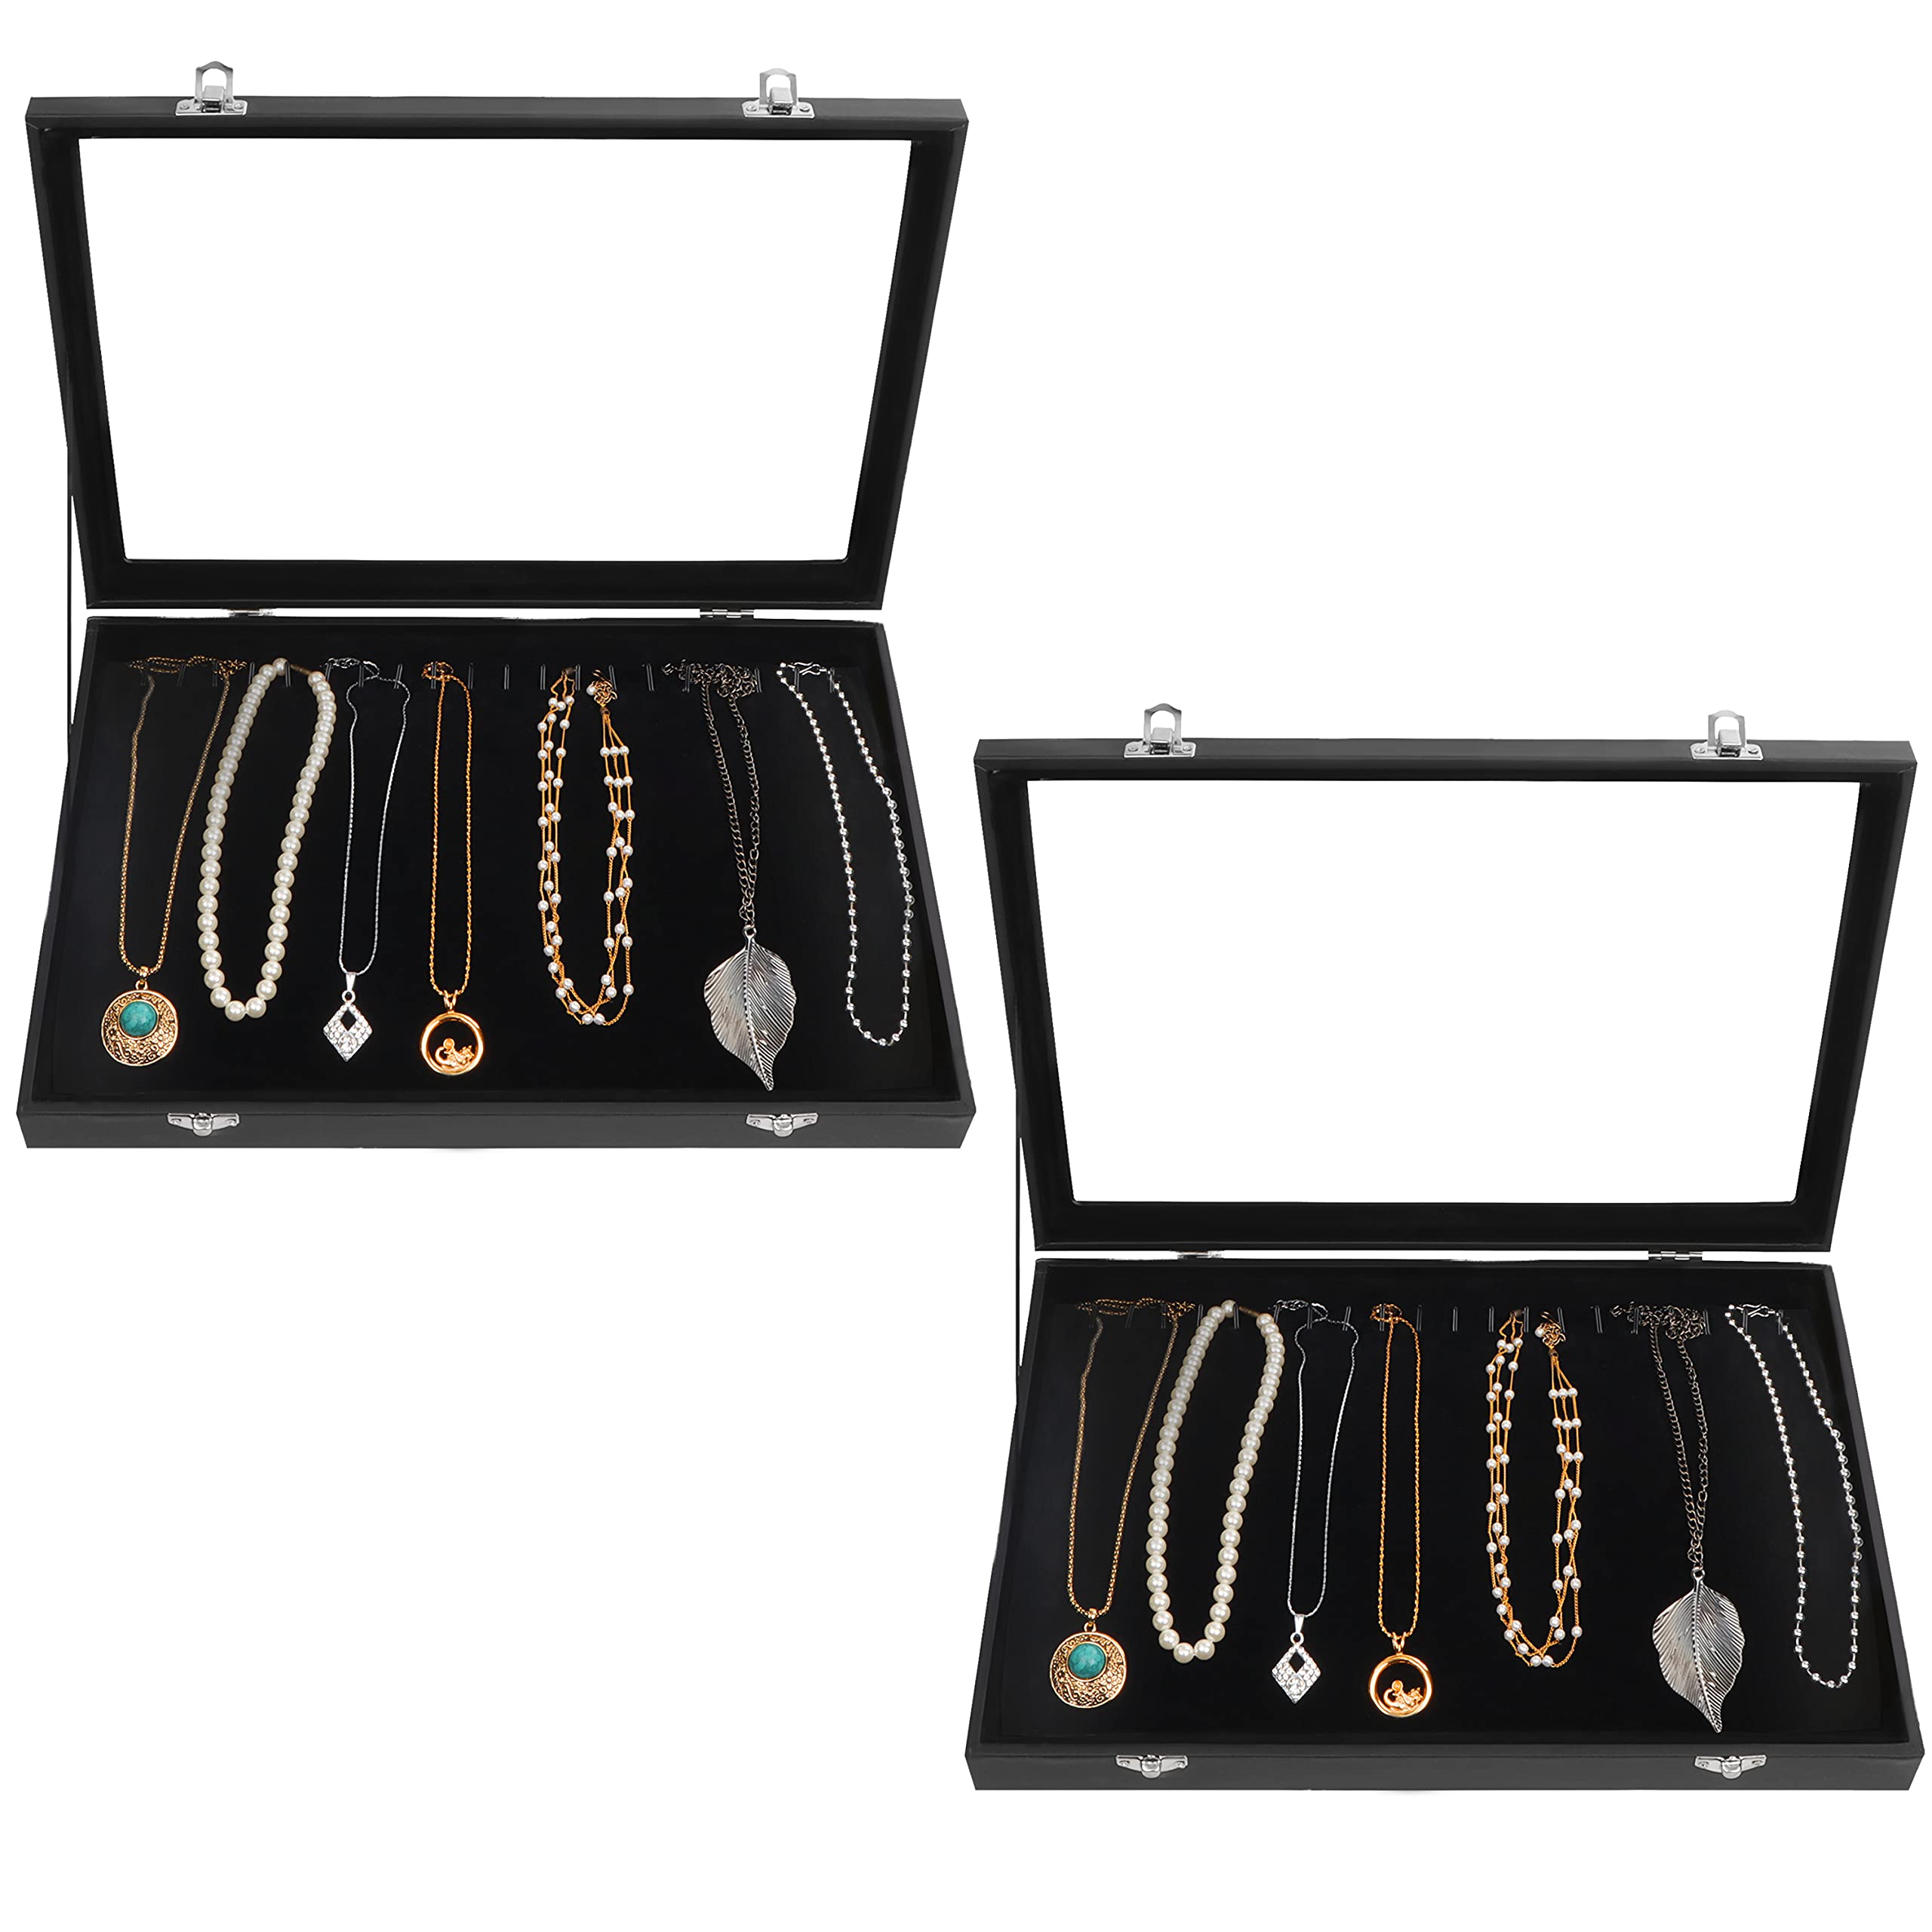 Kurtzy Black Velvet Necklace Jewellery Organise Storage Display Case Box Tray with 20 Hooks and Lockable Glass Lid (2 Pack) - Stackable Tray for Drawer - For Necklaces, Bracelets, Earrings and Anklets